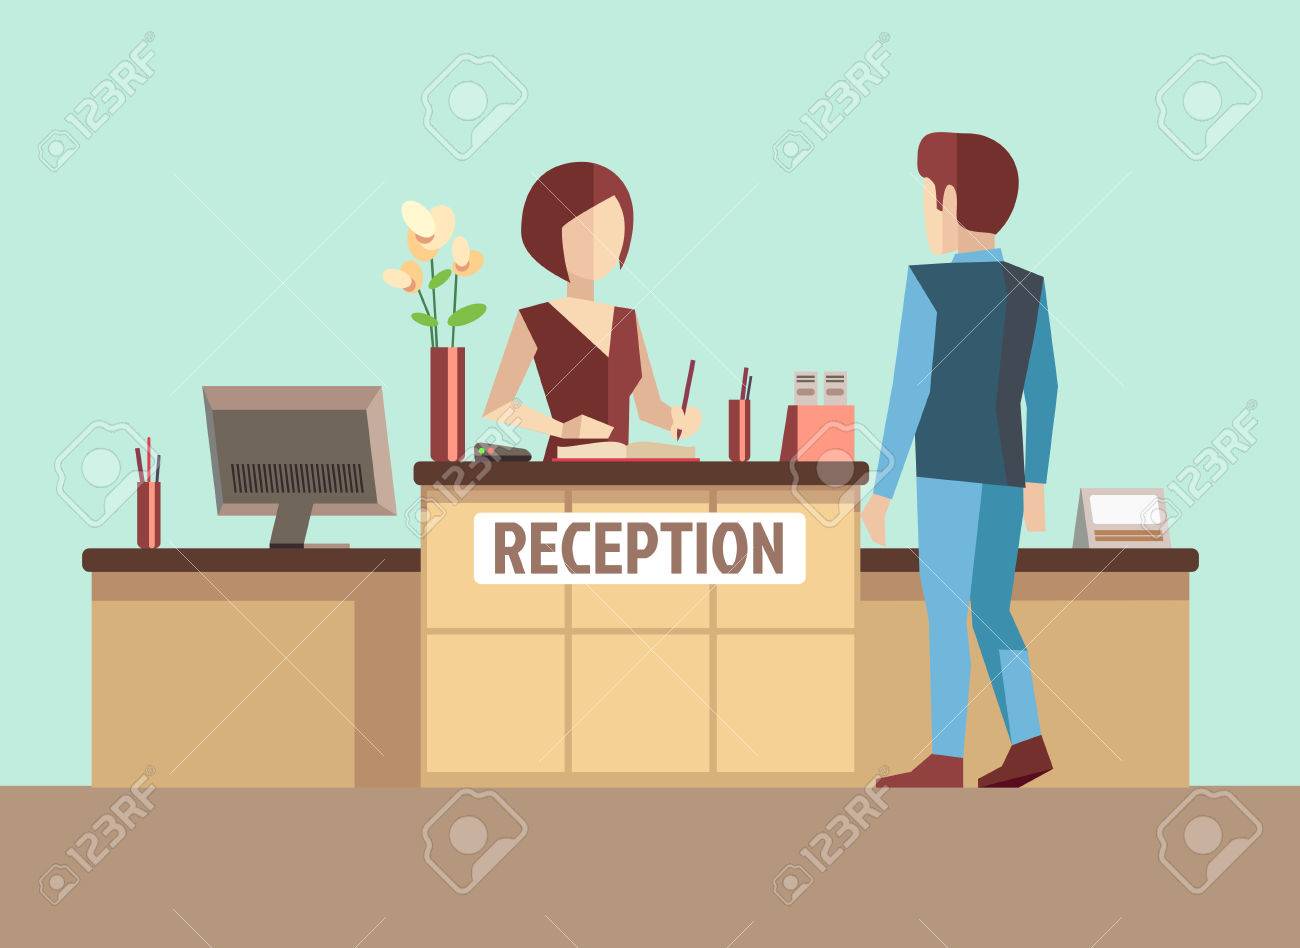 Customer At Reception. Vector Concept In Flat Style